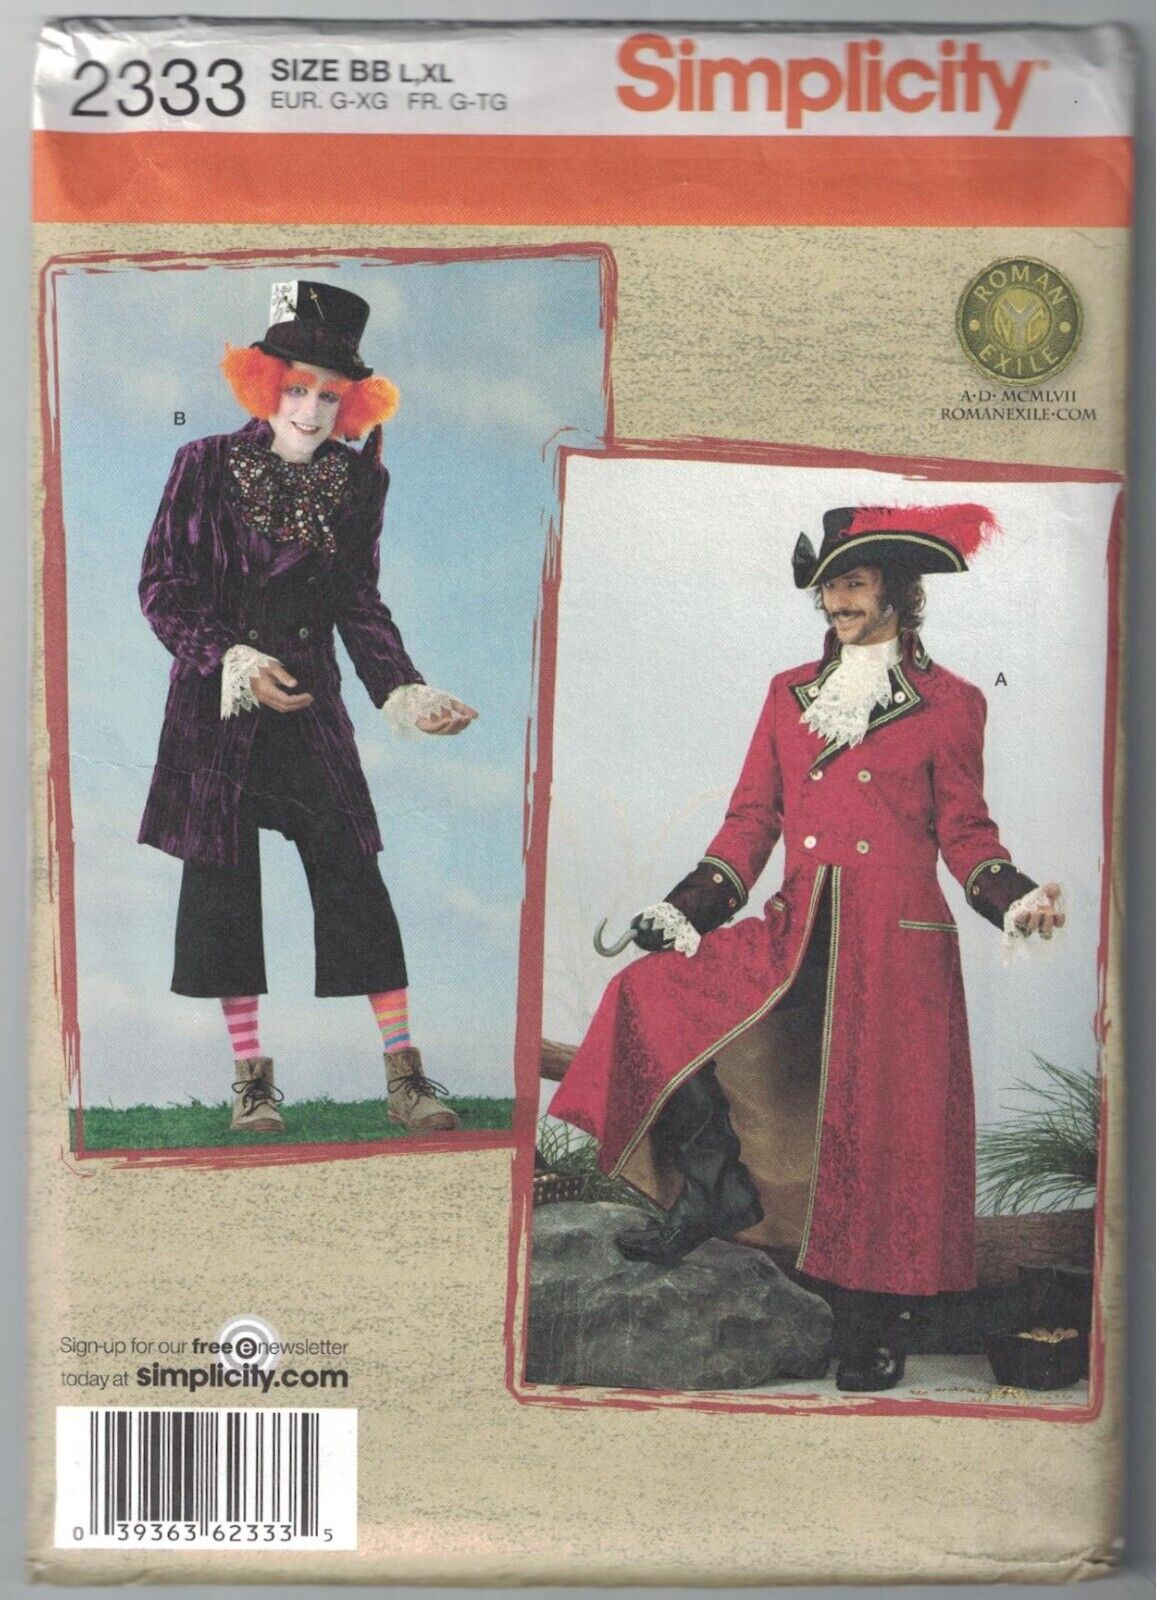 SIMPLICITY PATTERN #2333 MAD HATTER JOHNNY DEPP PIRATE HALLOWEEN COS-PLAY NEW